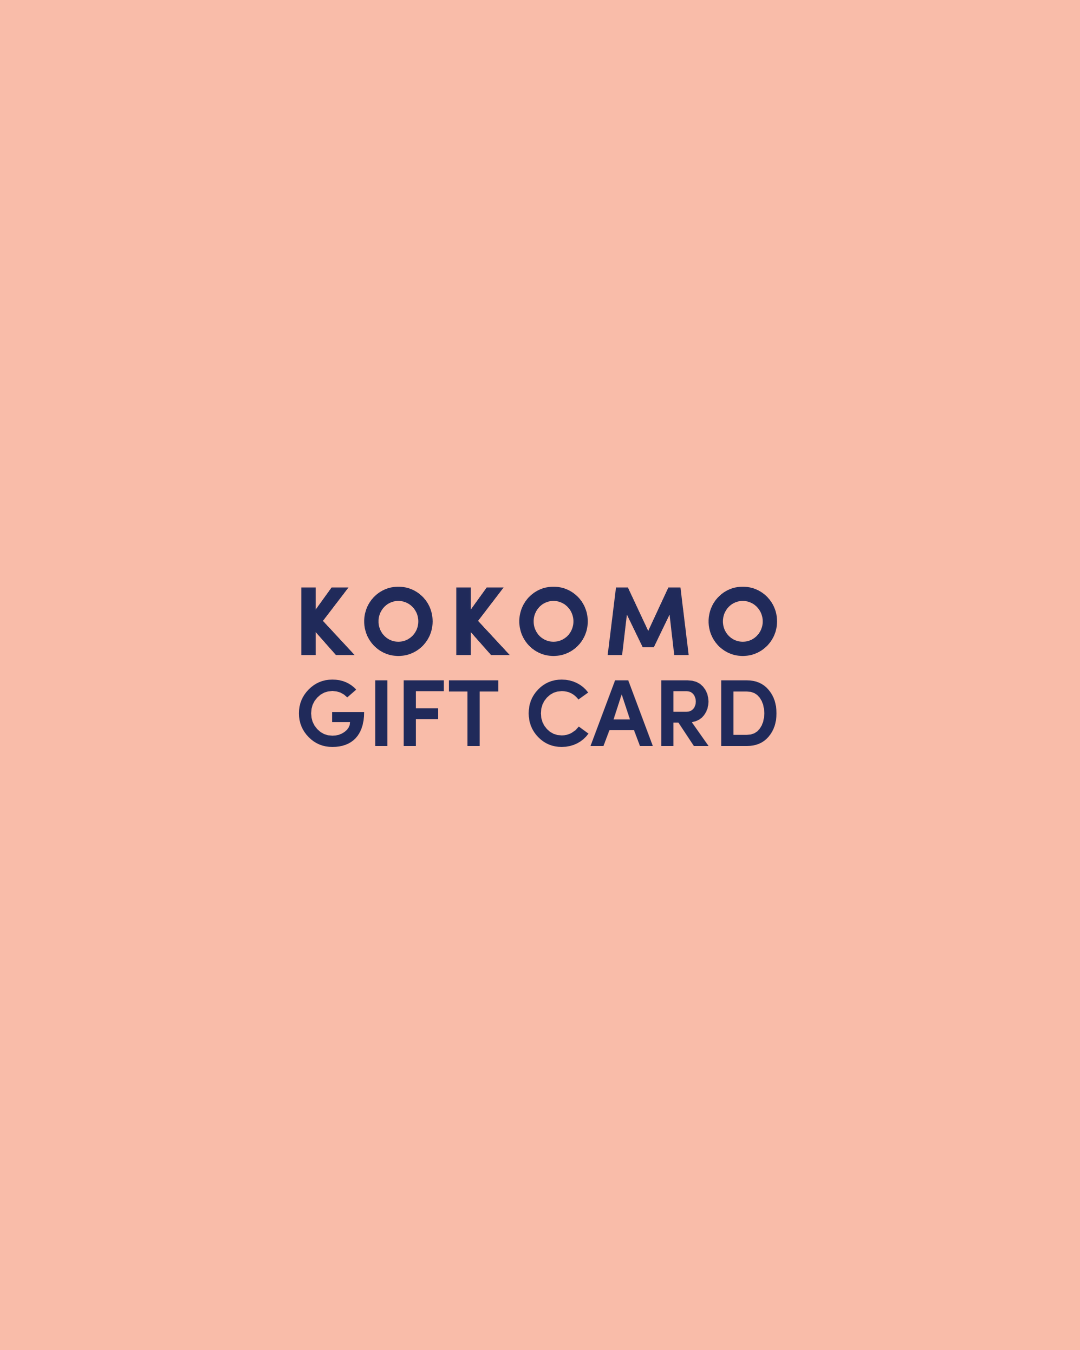 gift cards, gifts, gift certificates